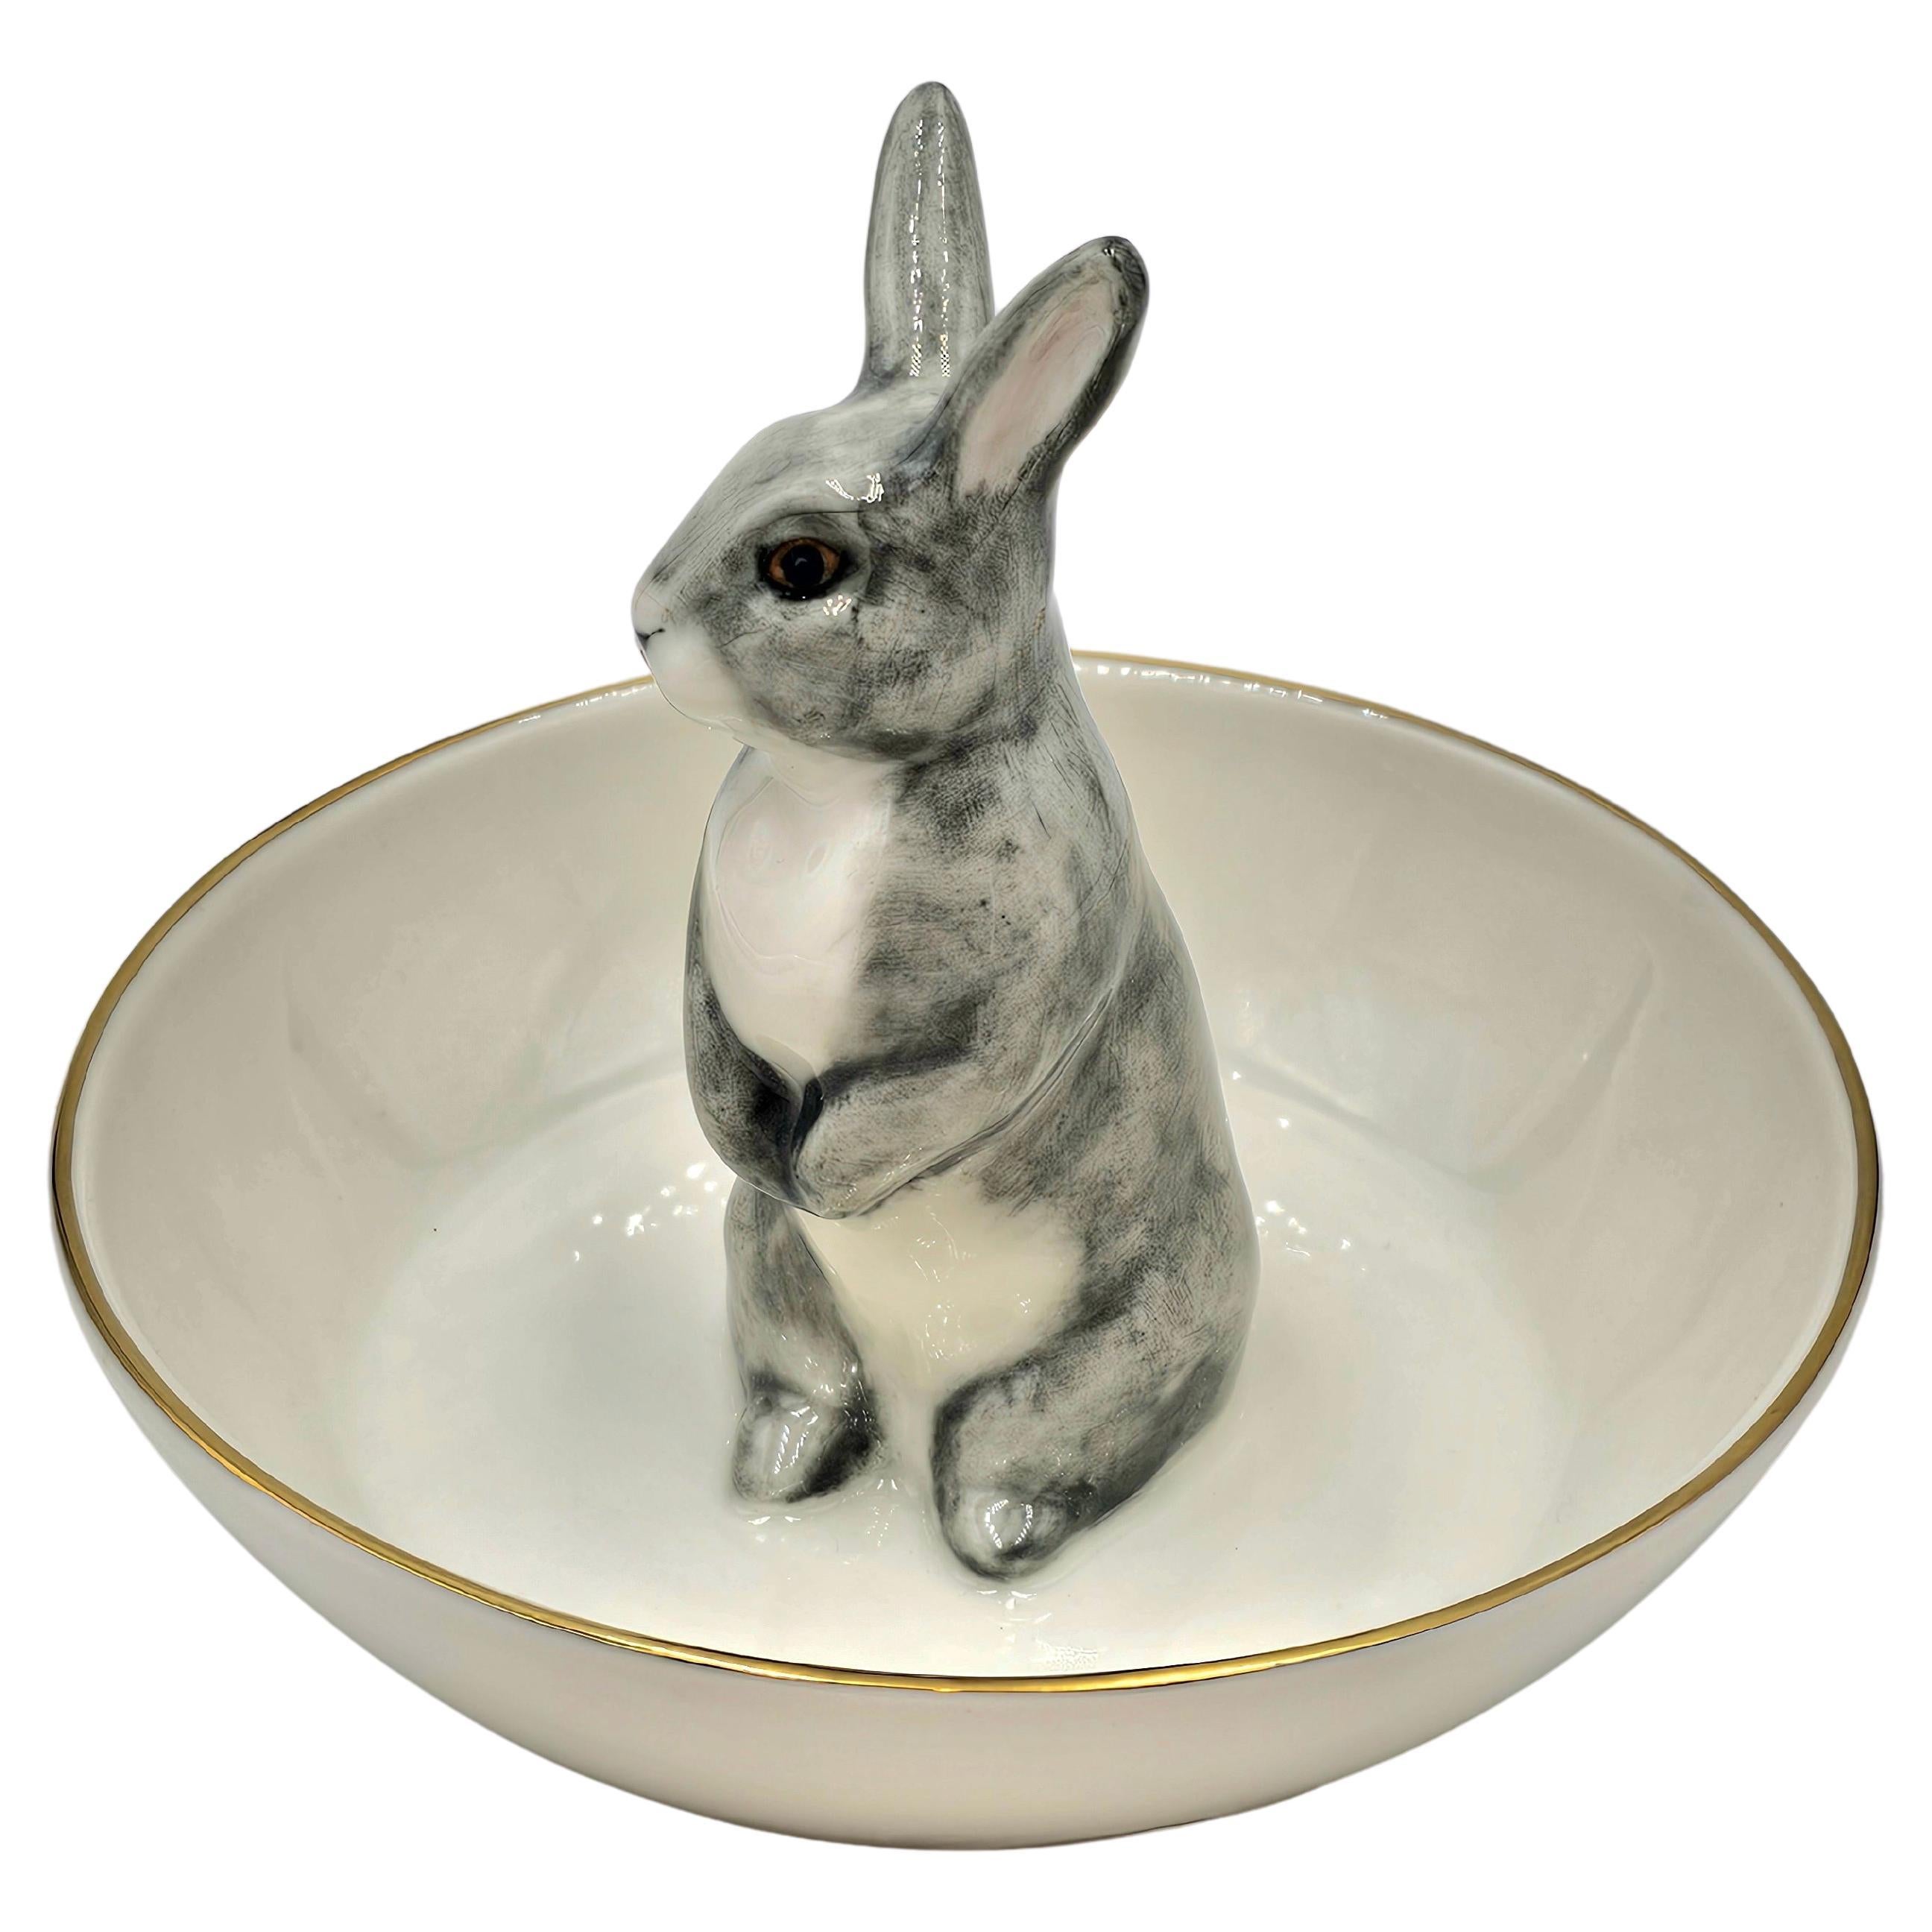 Country Style Easter Bowl Porcelain with Hare Figure Sofina Boutique Kitzbuehel For Sale